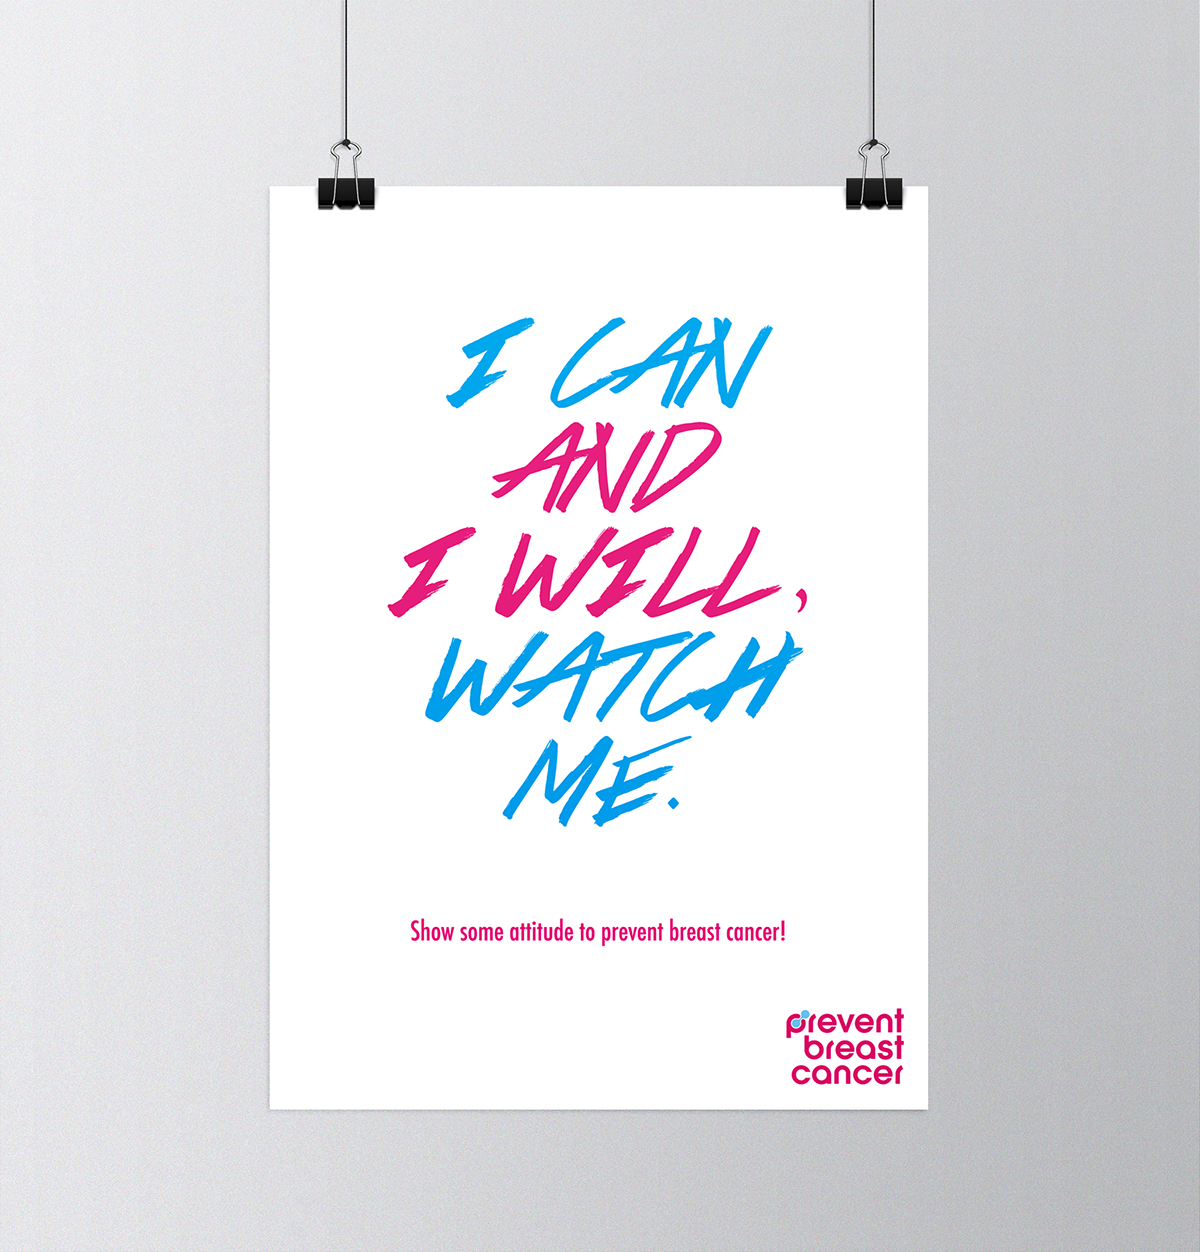 Adobe Portfolio prevent breast cancer campaign charity Cause girlpower typography   Wristbands posters